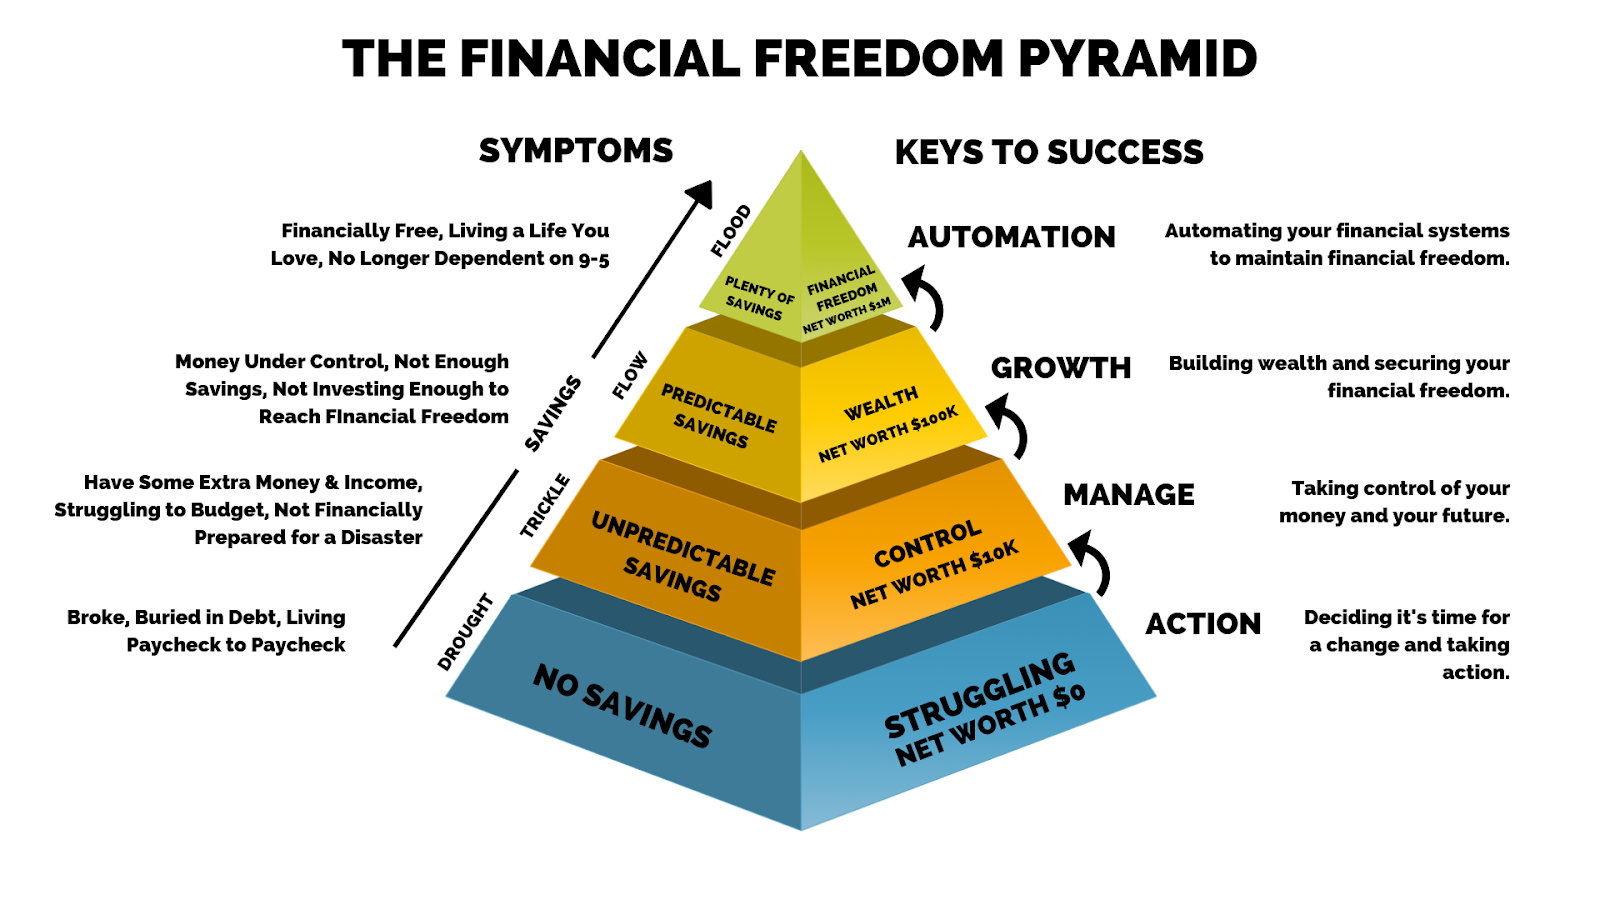 permanent life insurance policy from insurance company can be used to infinite banking work - an image of the financial freedom pyramid, showing symptoms and key to success